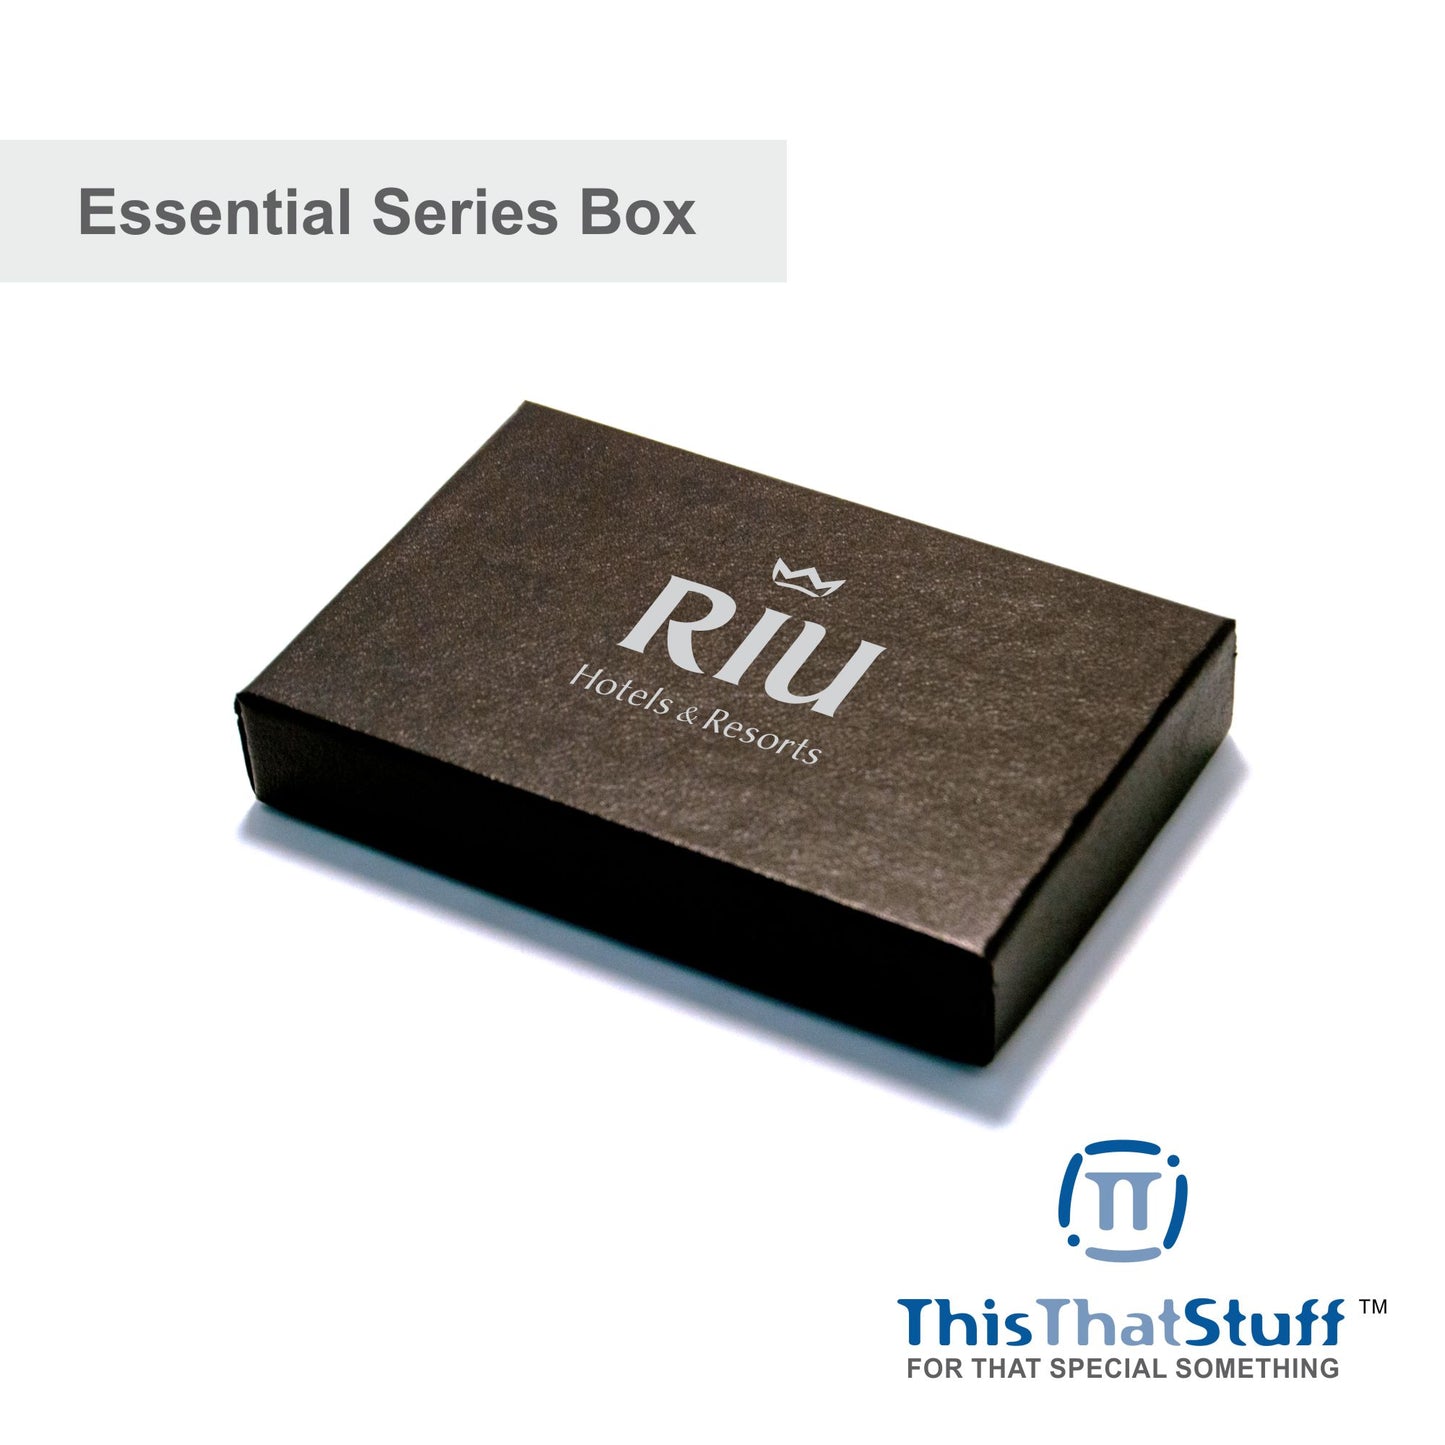 Gift Card Box Essential Series – Holds our high end Metal Cards, can also hold any Credit Card or Gift Card size – Custom Printed Box